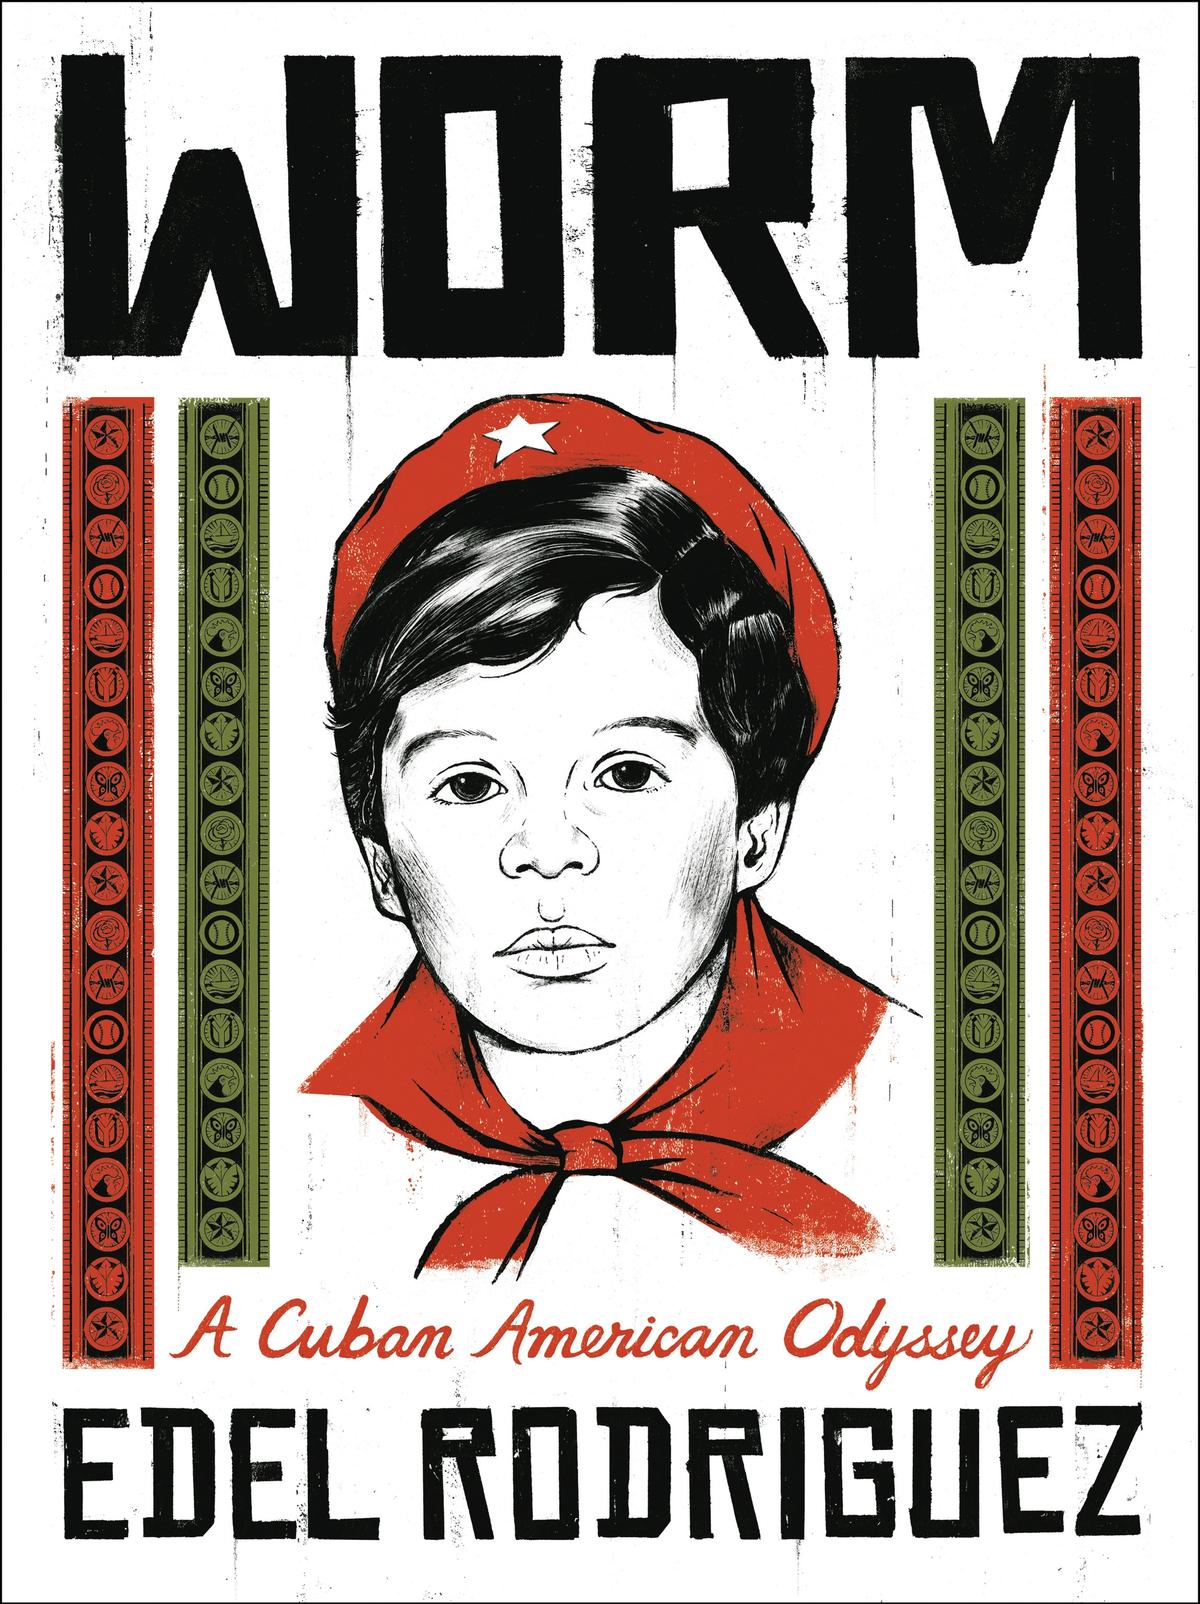 The front cover of Worm © 2023 Edel Rodriguez